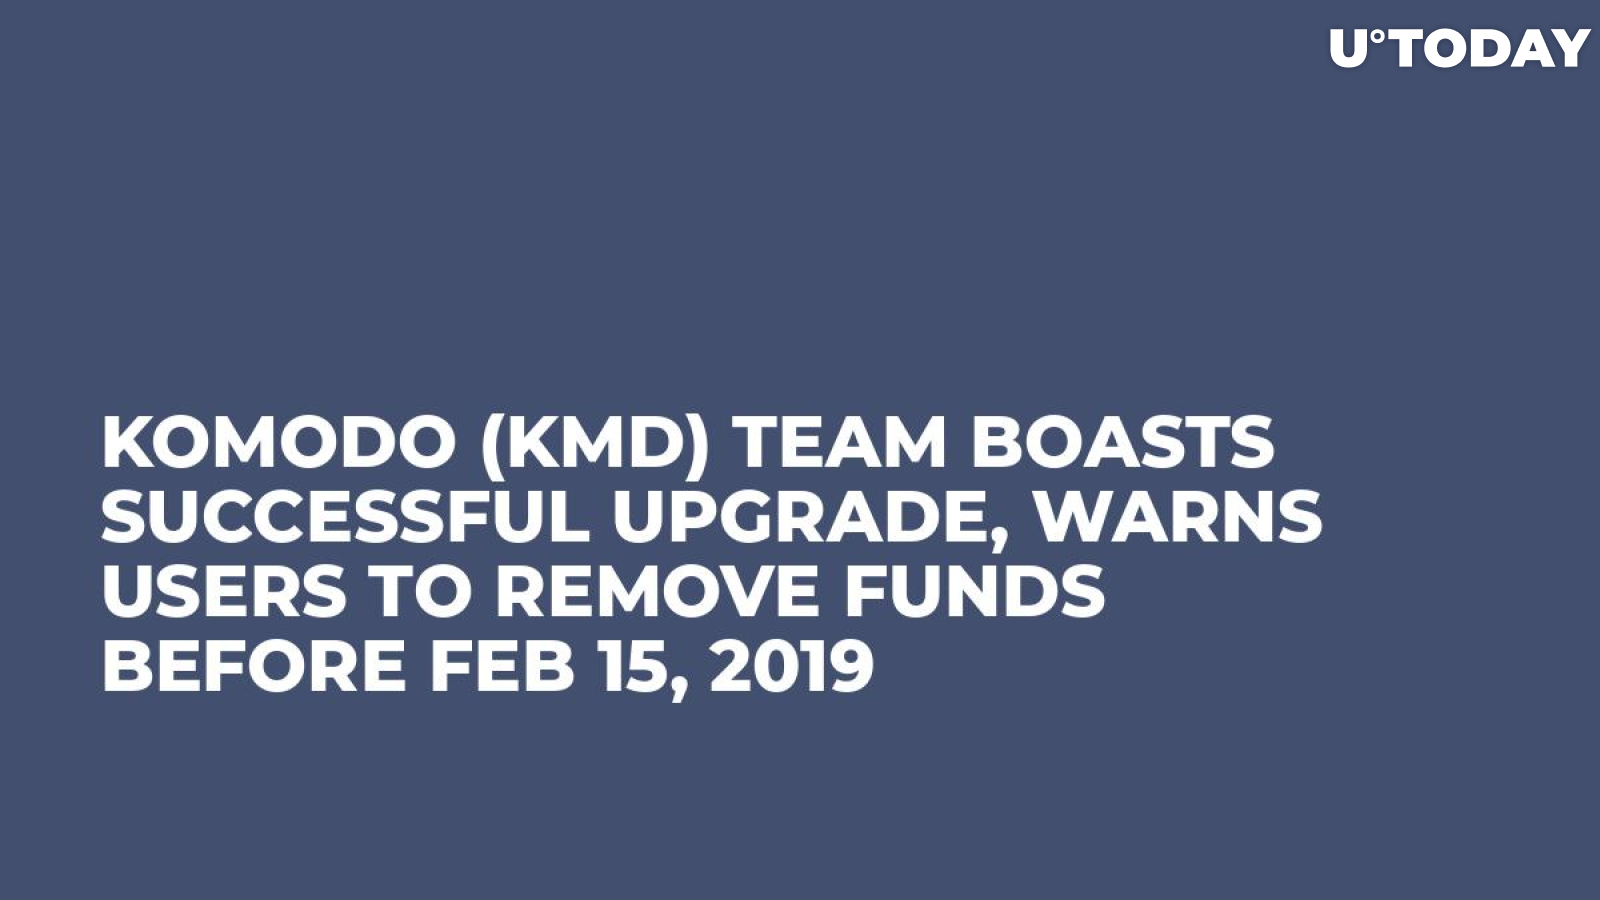 Komodo (KMD) Team Boasts Successful Upgrade, Warns Users to Remove Funds Before Feb 15, 2019